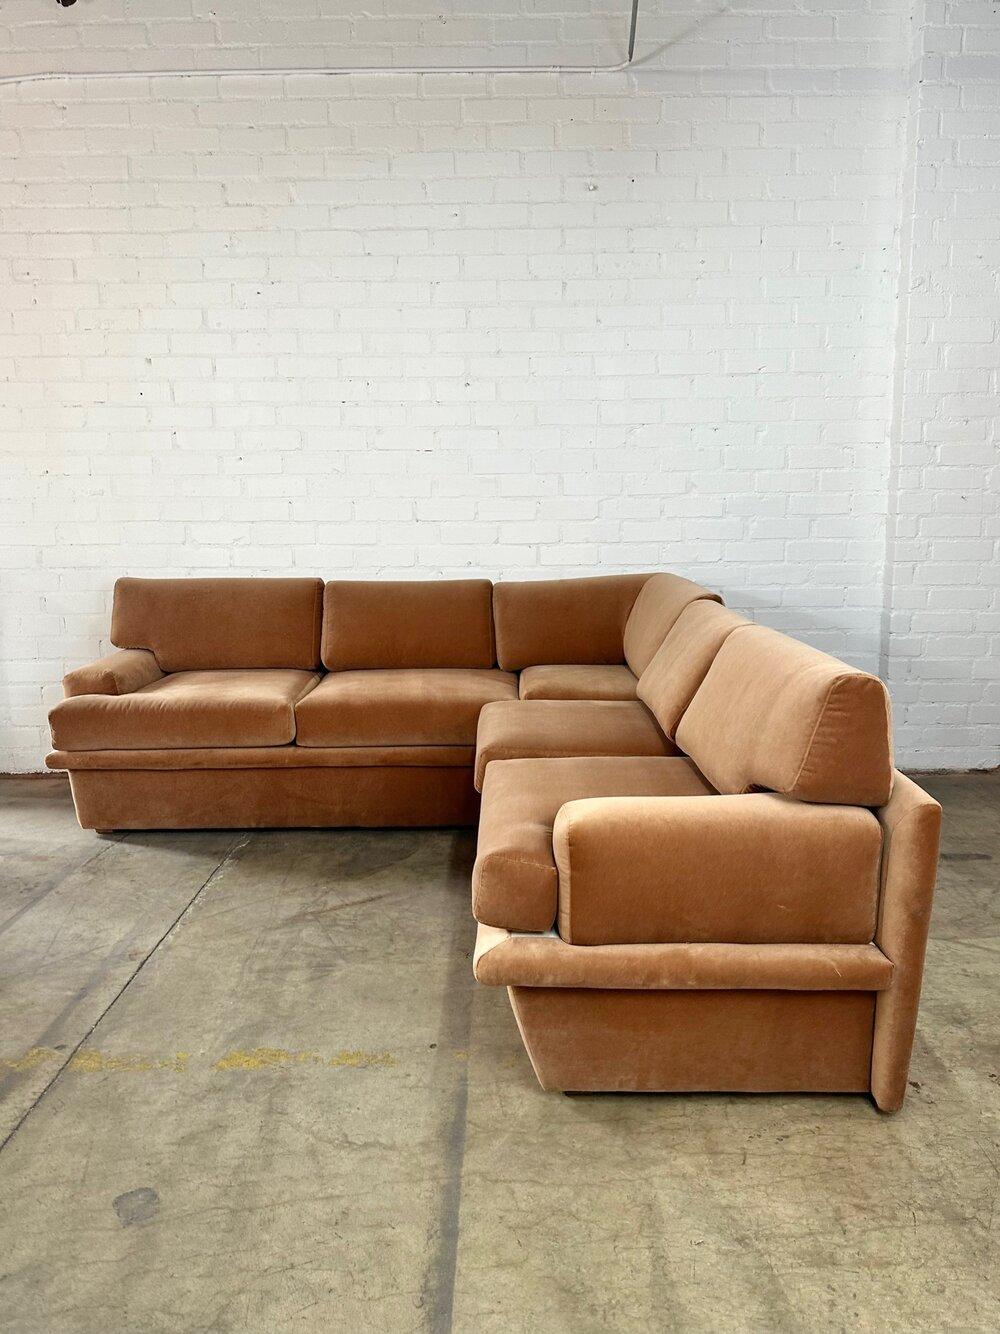 Measures: W97 D100 H36 SW76 (both sides) SD23 SH21 AH24

Large L-shaped sectional with great lines all in a blush tone velvet. The seats are deep, tall and very comfortable. There fabric is overall in good condition with minor signs of wear along